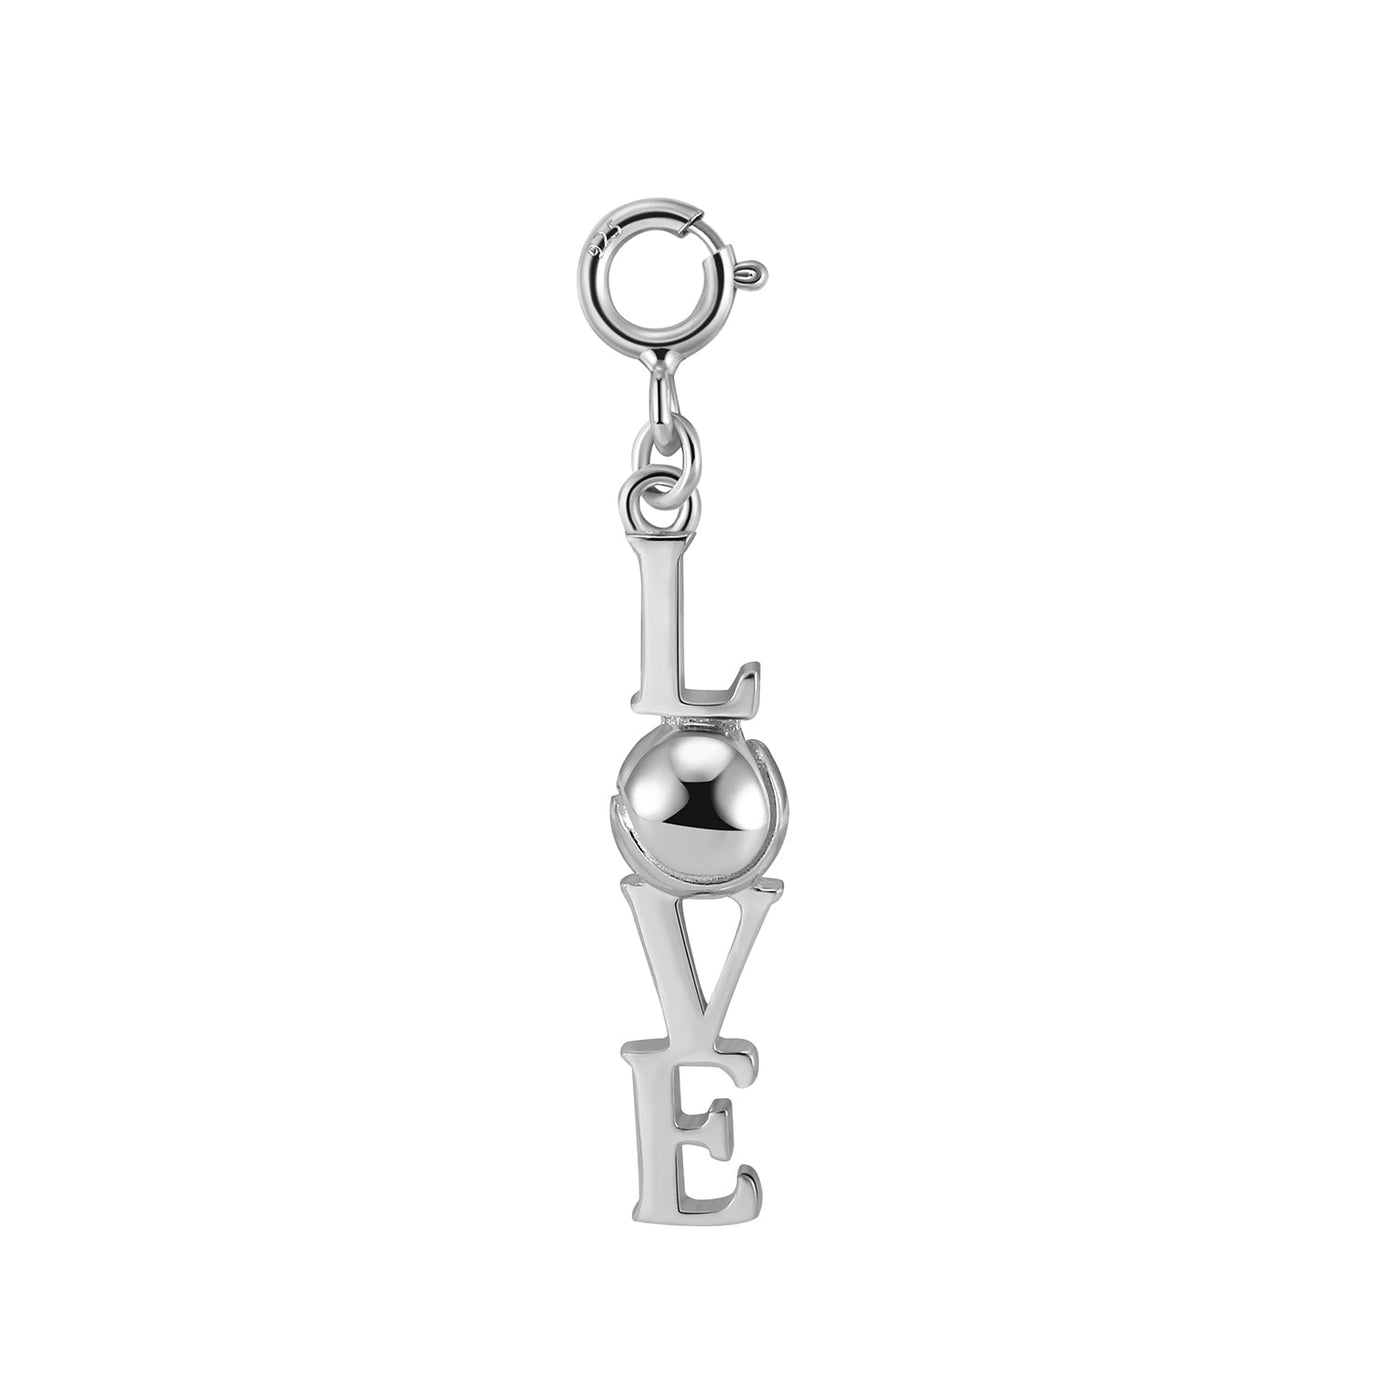 Silver tennis charm featuring the words "LOVE" stacked vertically with a tennis ball for the O.